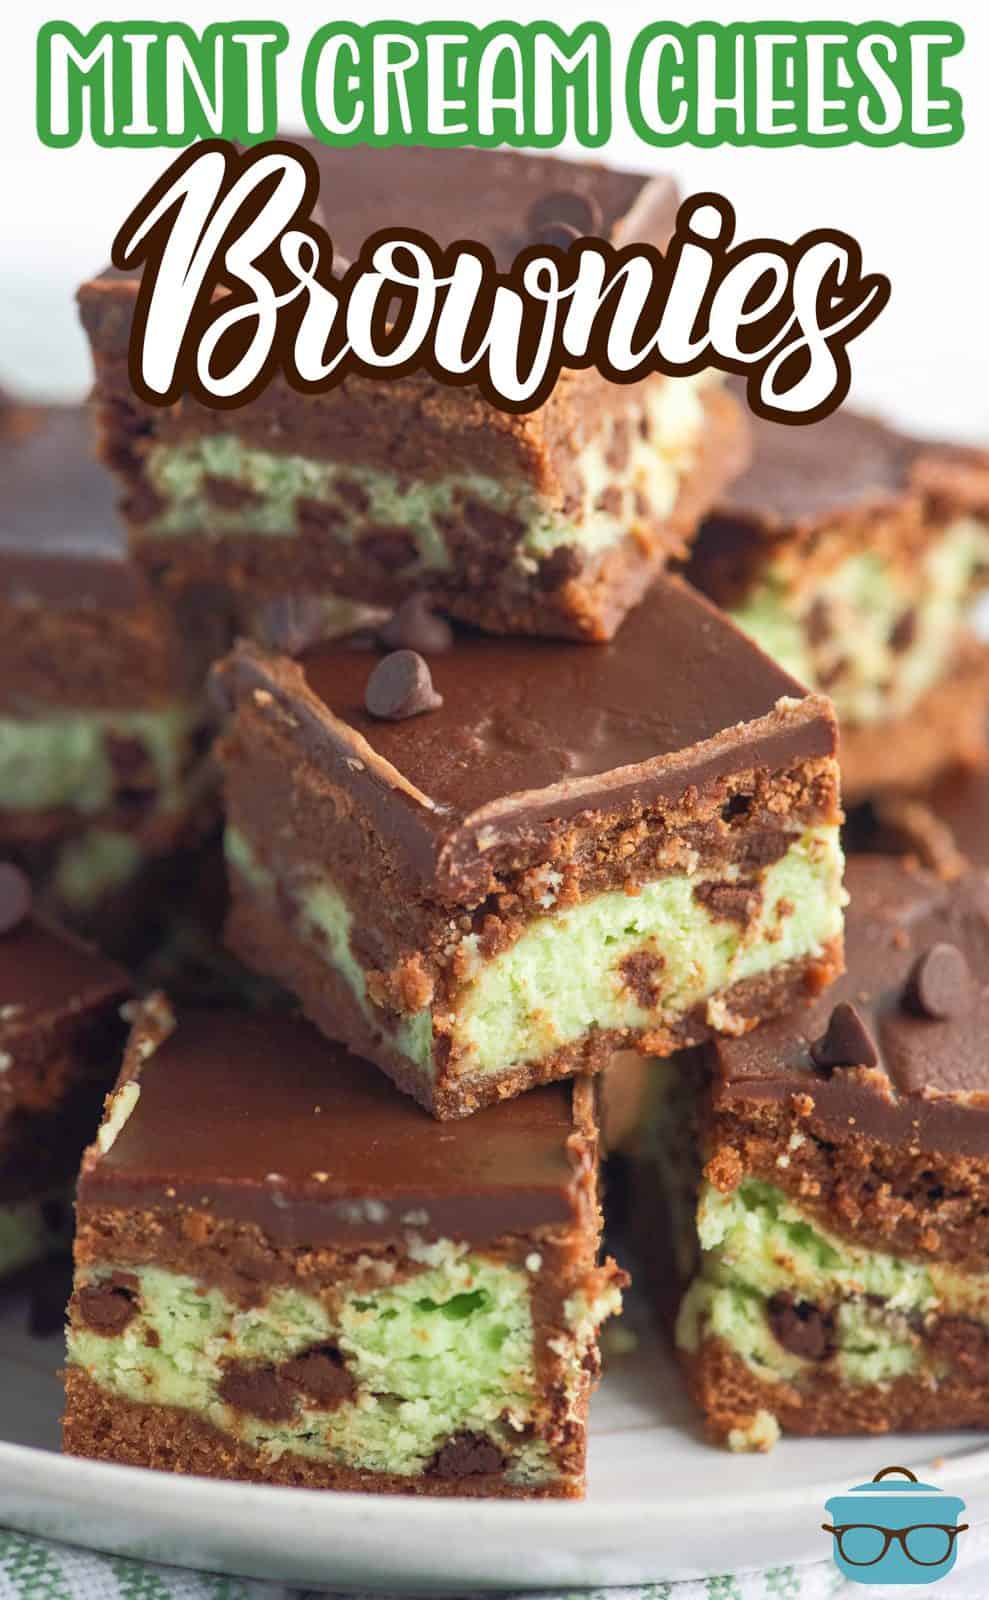 Pinterest image of stacked Mint Cream Cheese Brownies on white plate.